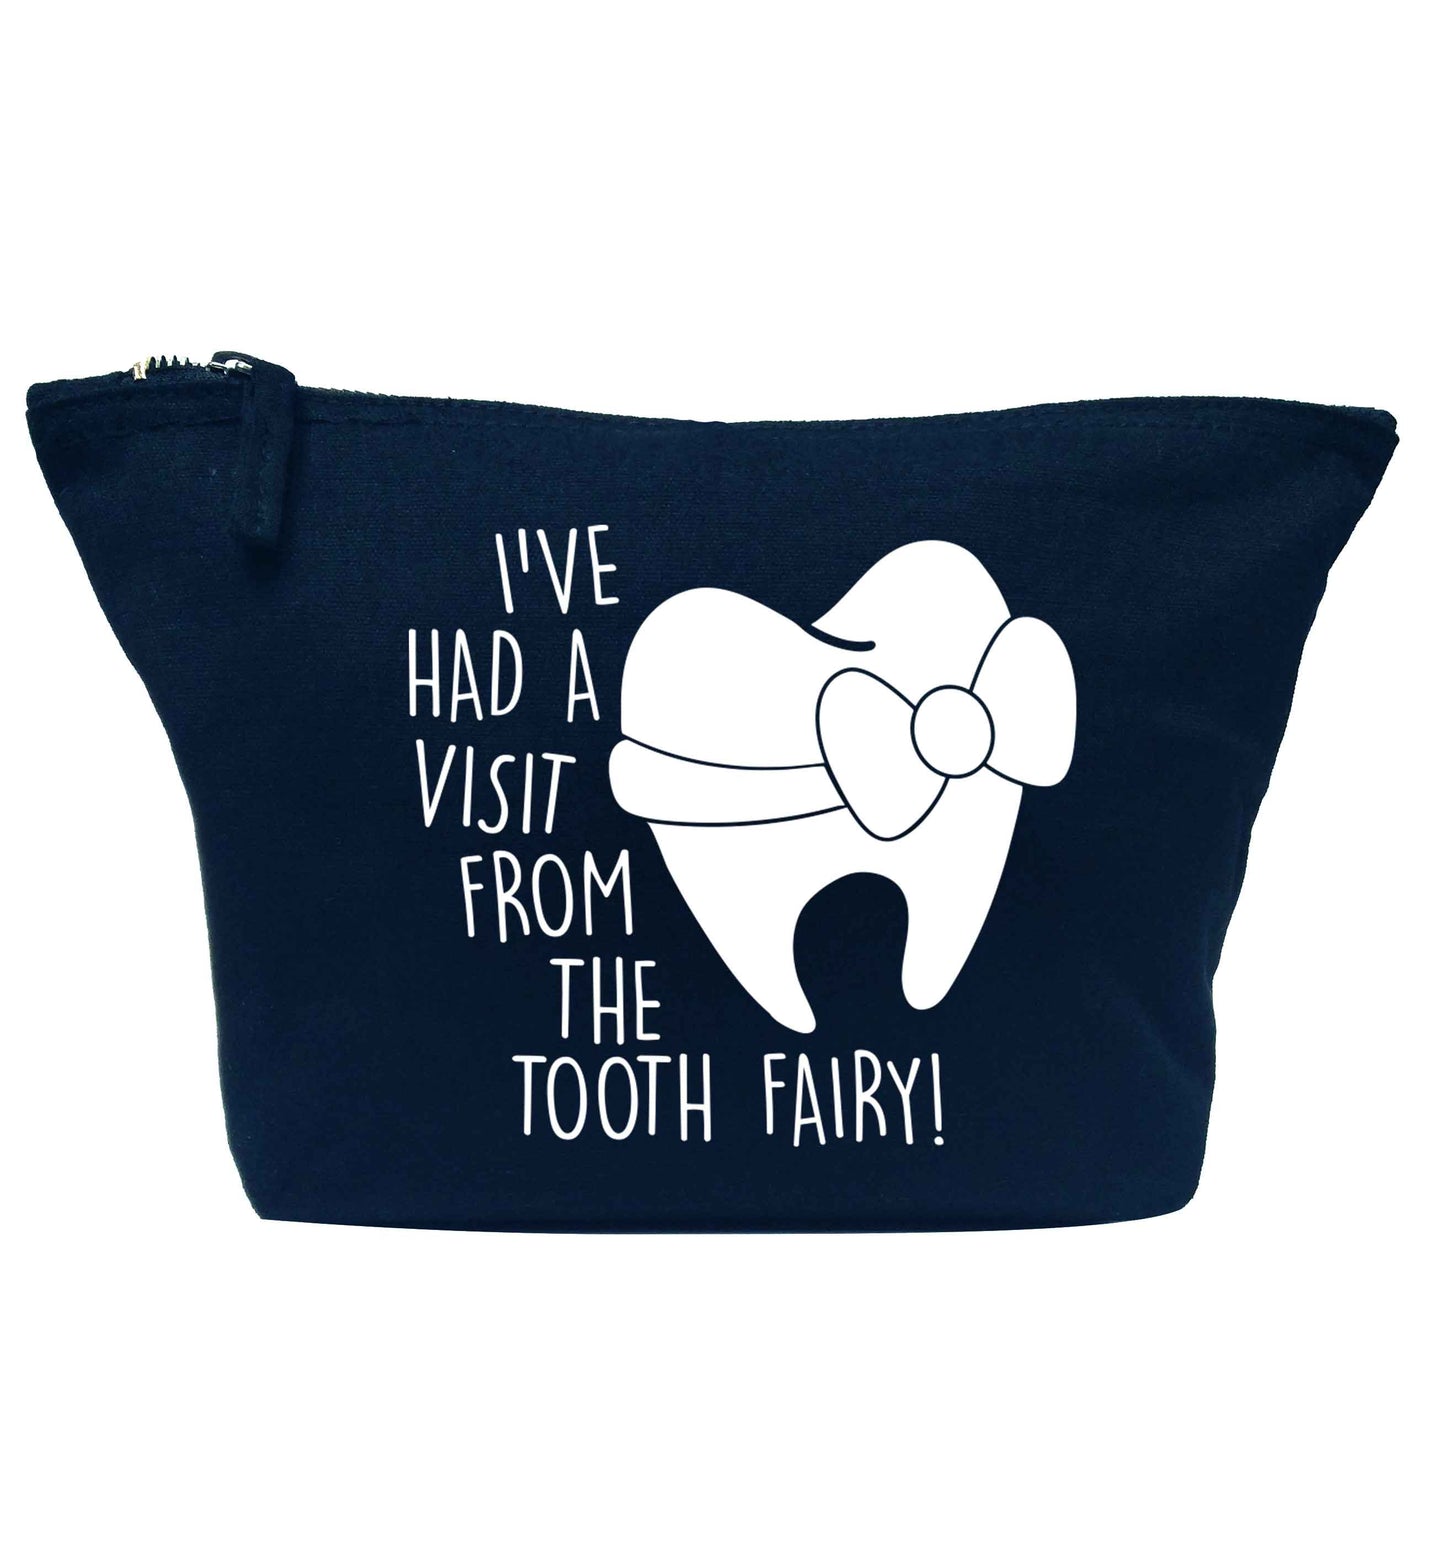 Visit From Tooth Fairy navy makeup bag